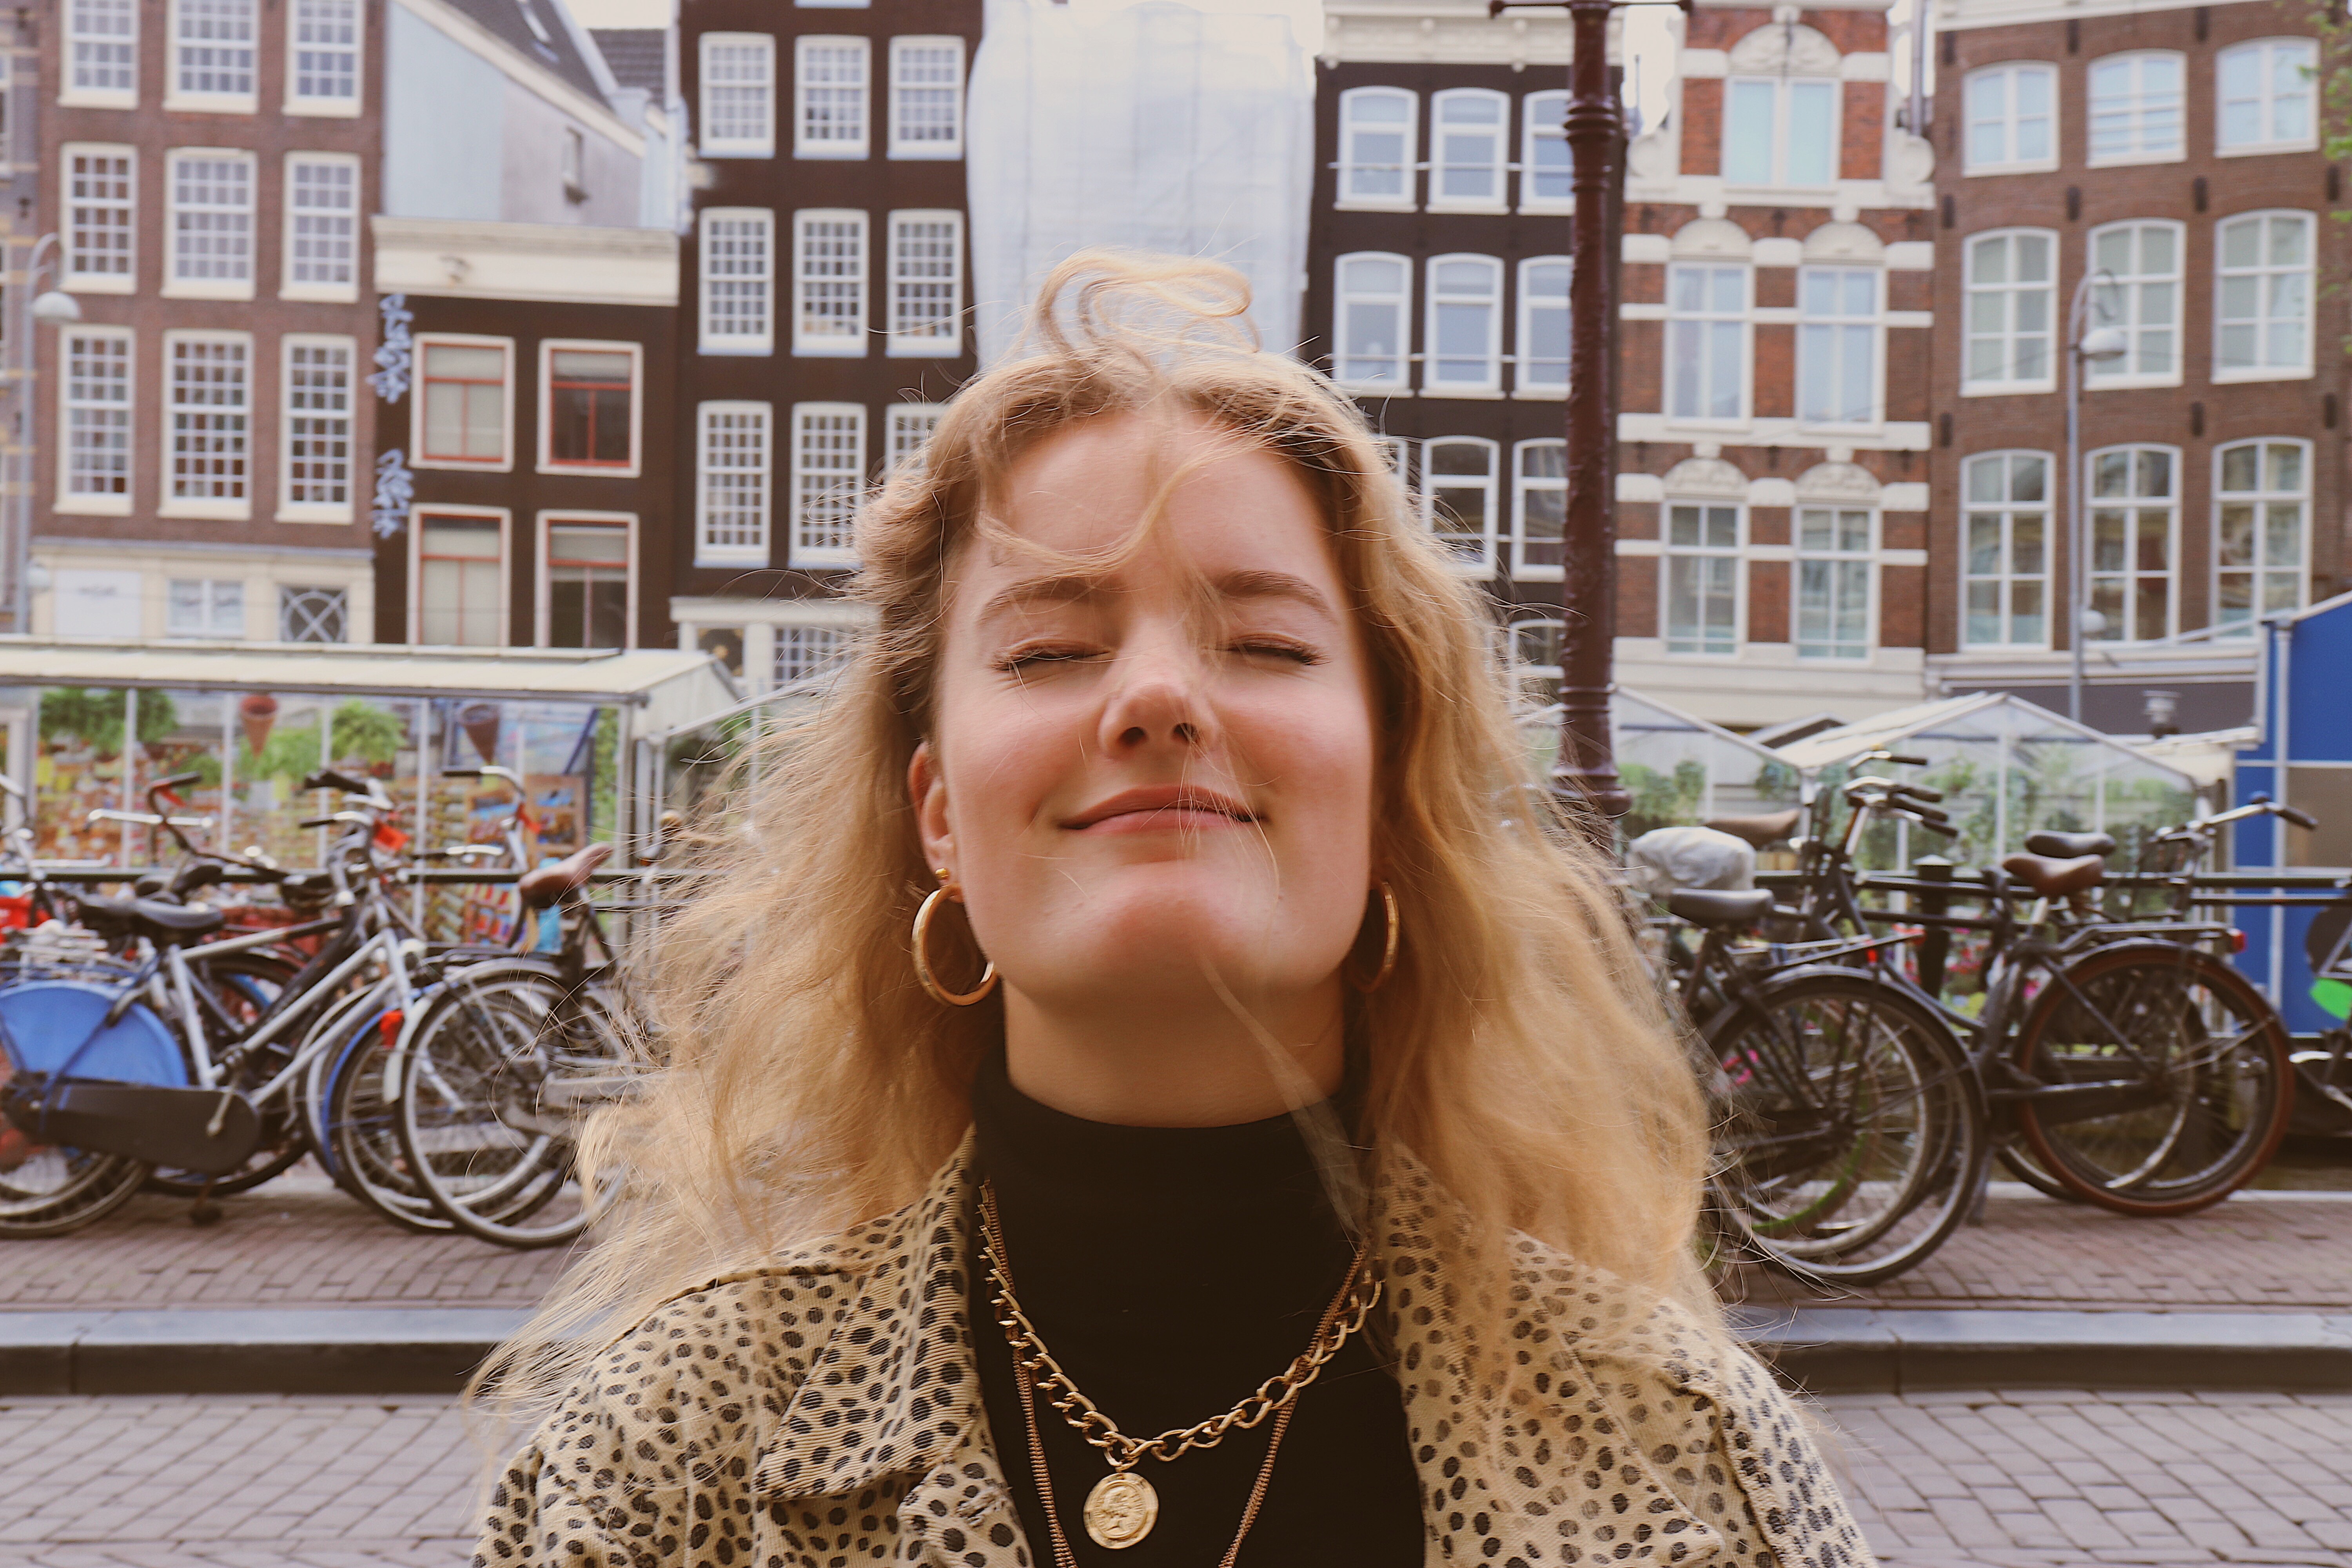 Photo of Mandy, Candace's friend from Amsterdam, Netherlands, with windswept hair, sitting at a cafe, in front of the canals with bikes behind her.